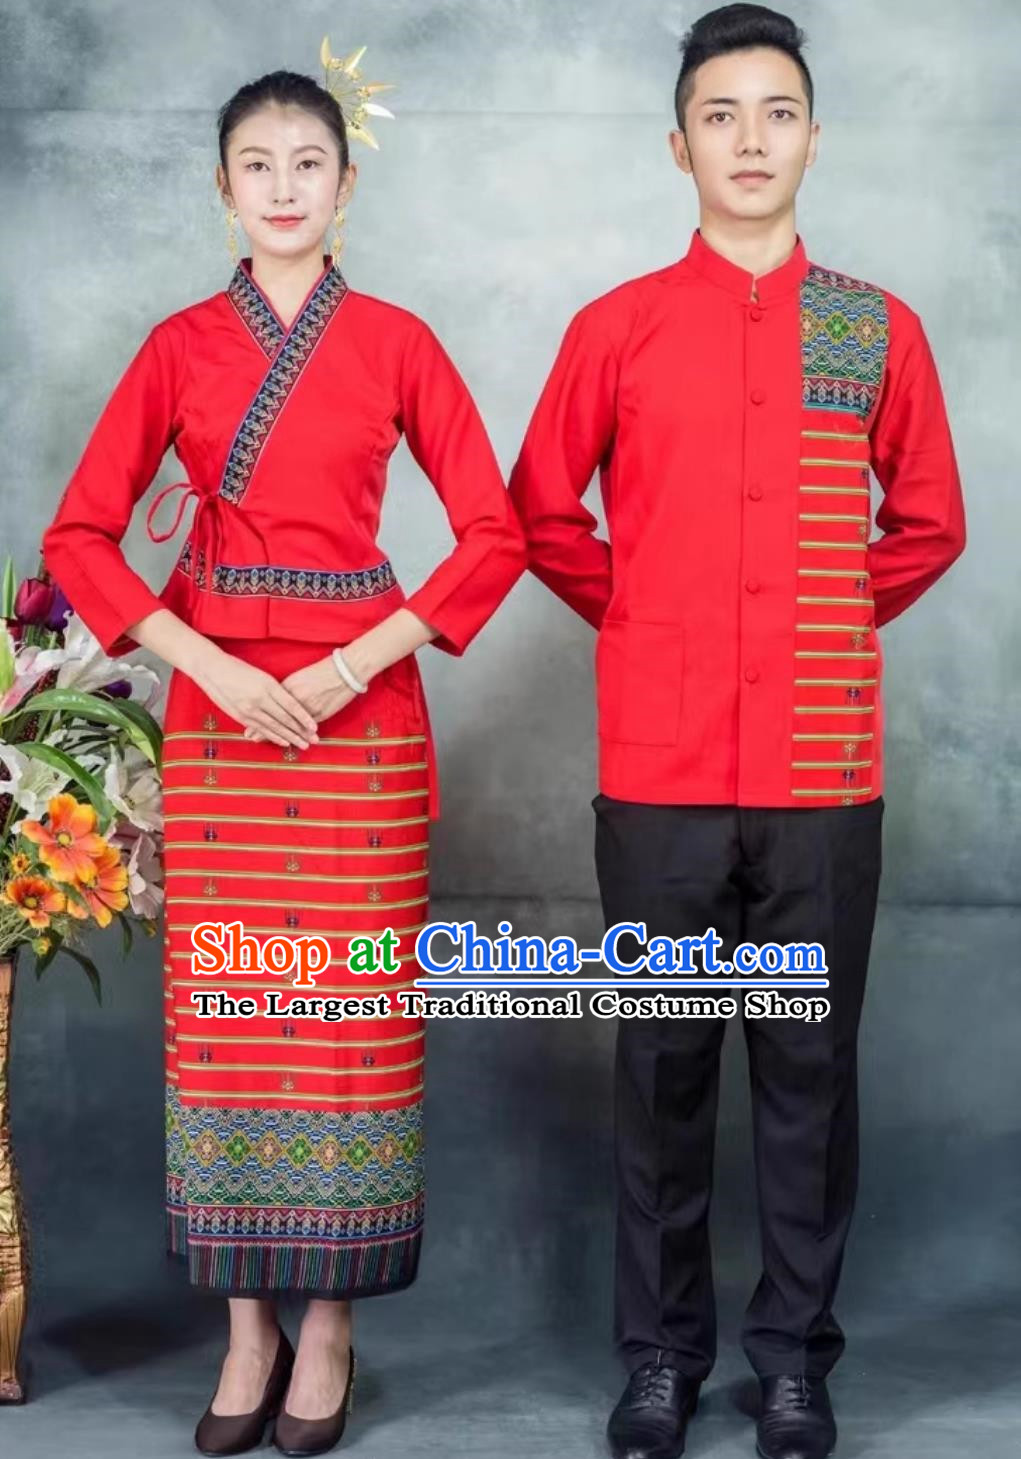 Dai Clothing For Men And Women Red Suit Restaurant Work Clothes Welcome Staff Uniforms